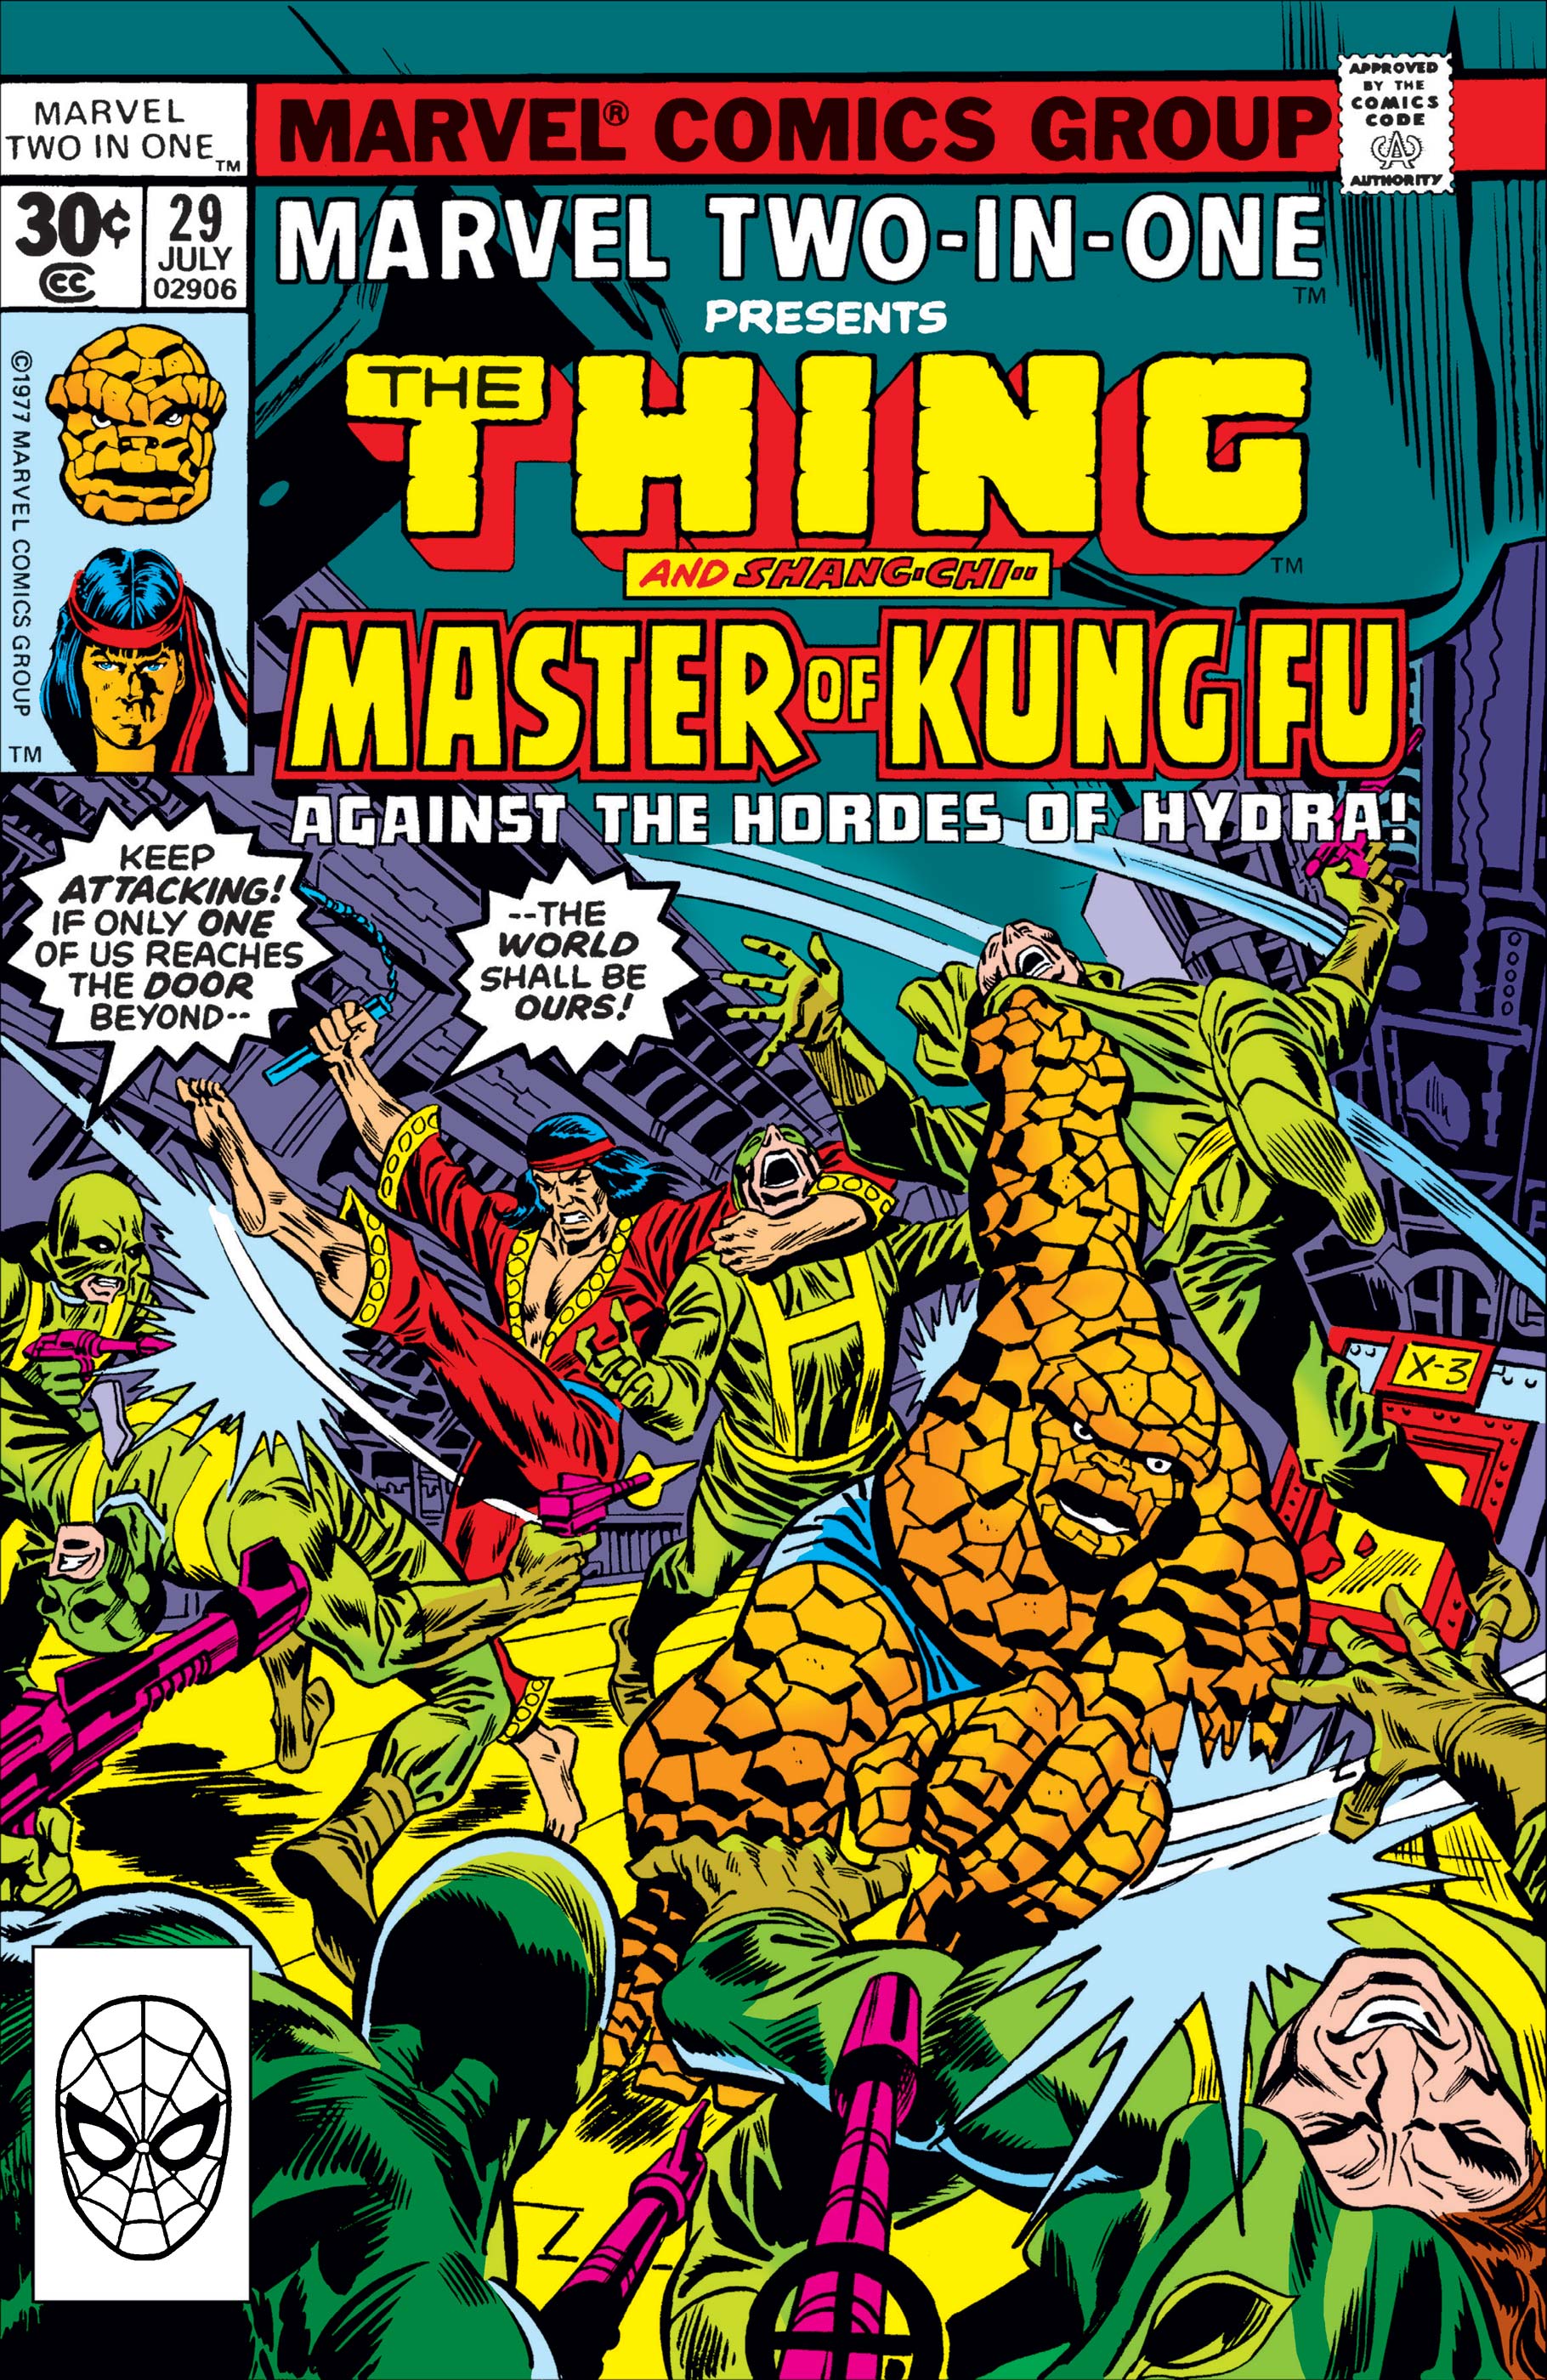 Marvel Two-in-One (1974) #29